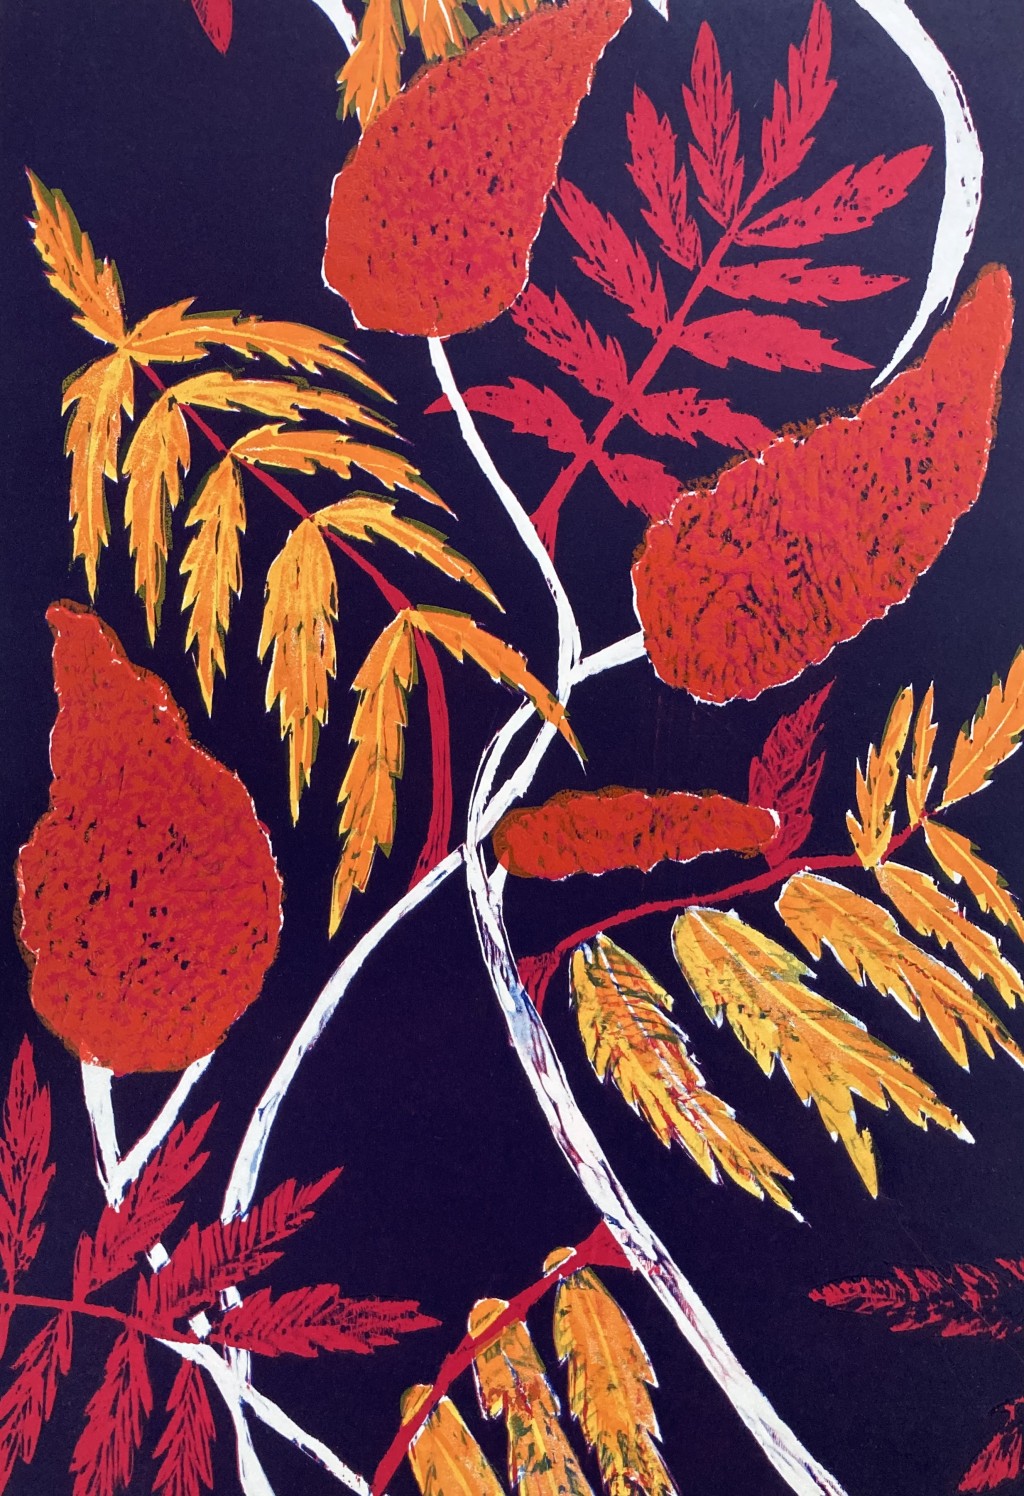 A section of a woodblock print by Rebecca Goodale entitled "Sumac"